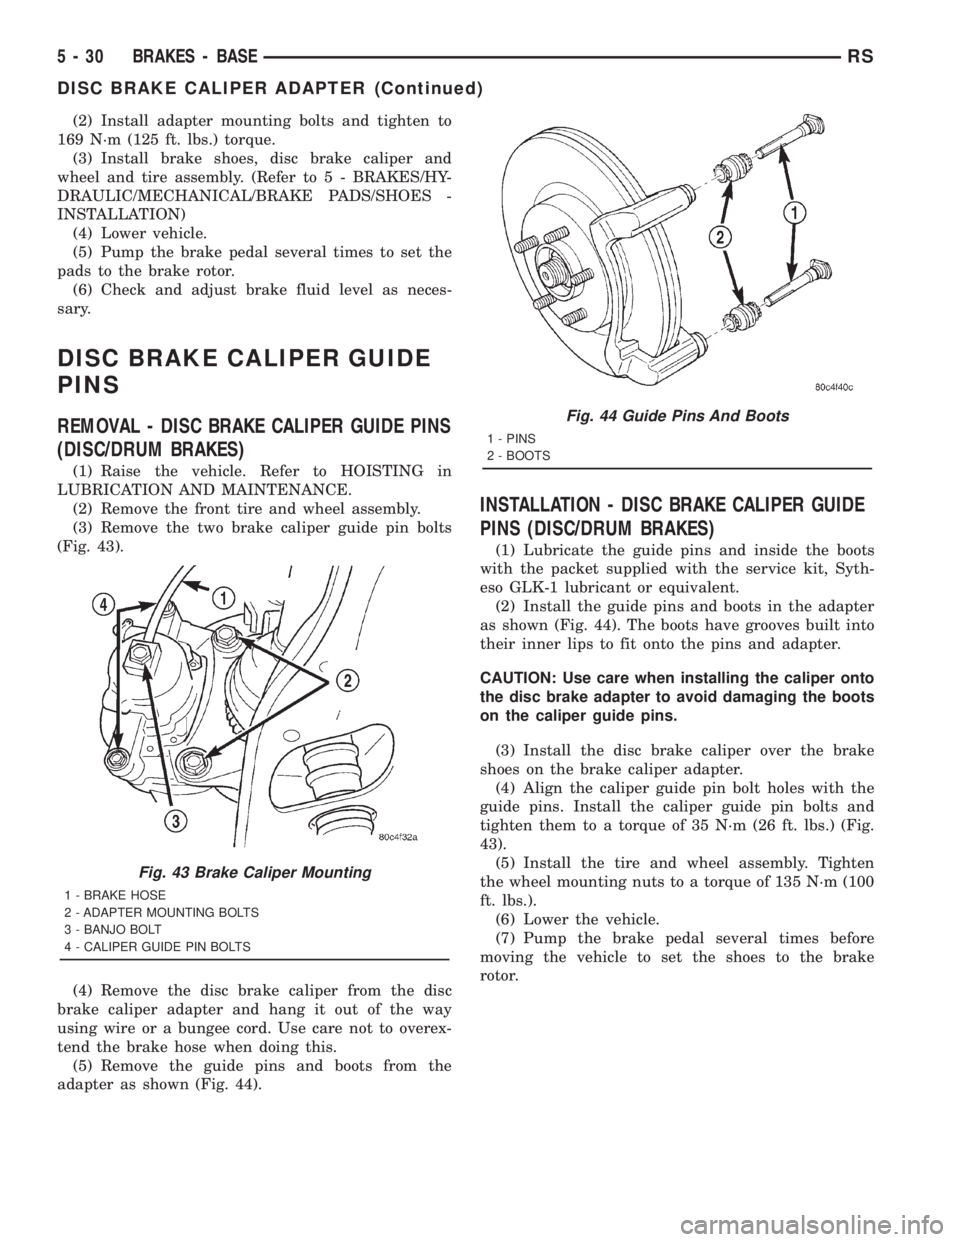 CHRYSLER VOYAGER 2001 Owners Guide (2) Install adapter mounting bolts and tighten to
169 N´m (125 ft. lbs.) torque.
(3) Install brake shoes, disc brake caliper and
wheel and tire assembly. (Refer to 5 - BRAKES/HY-
DRAULIC/MECHANICAL/B